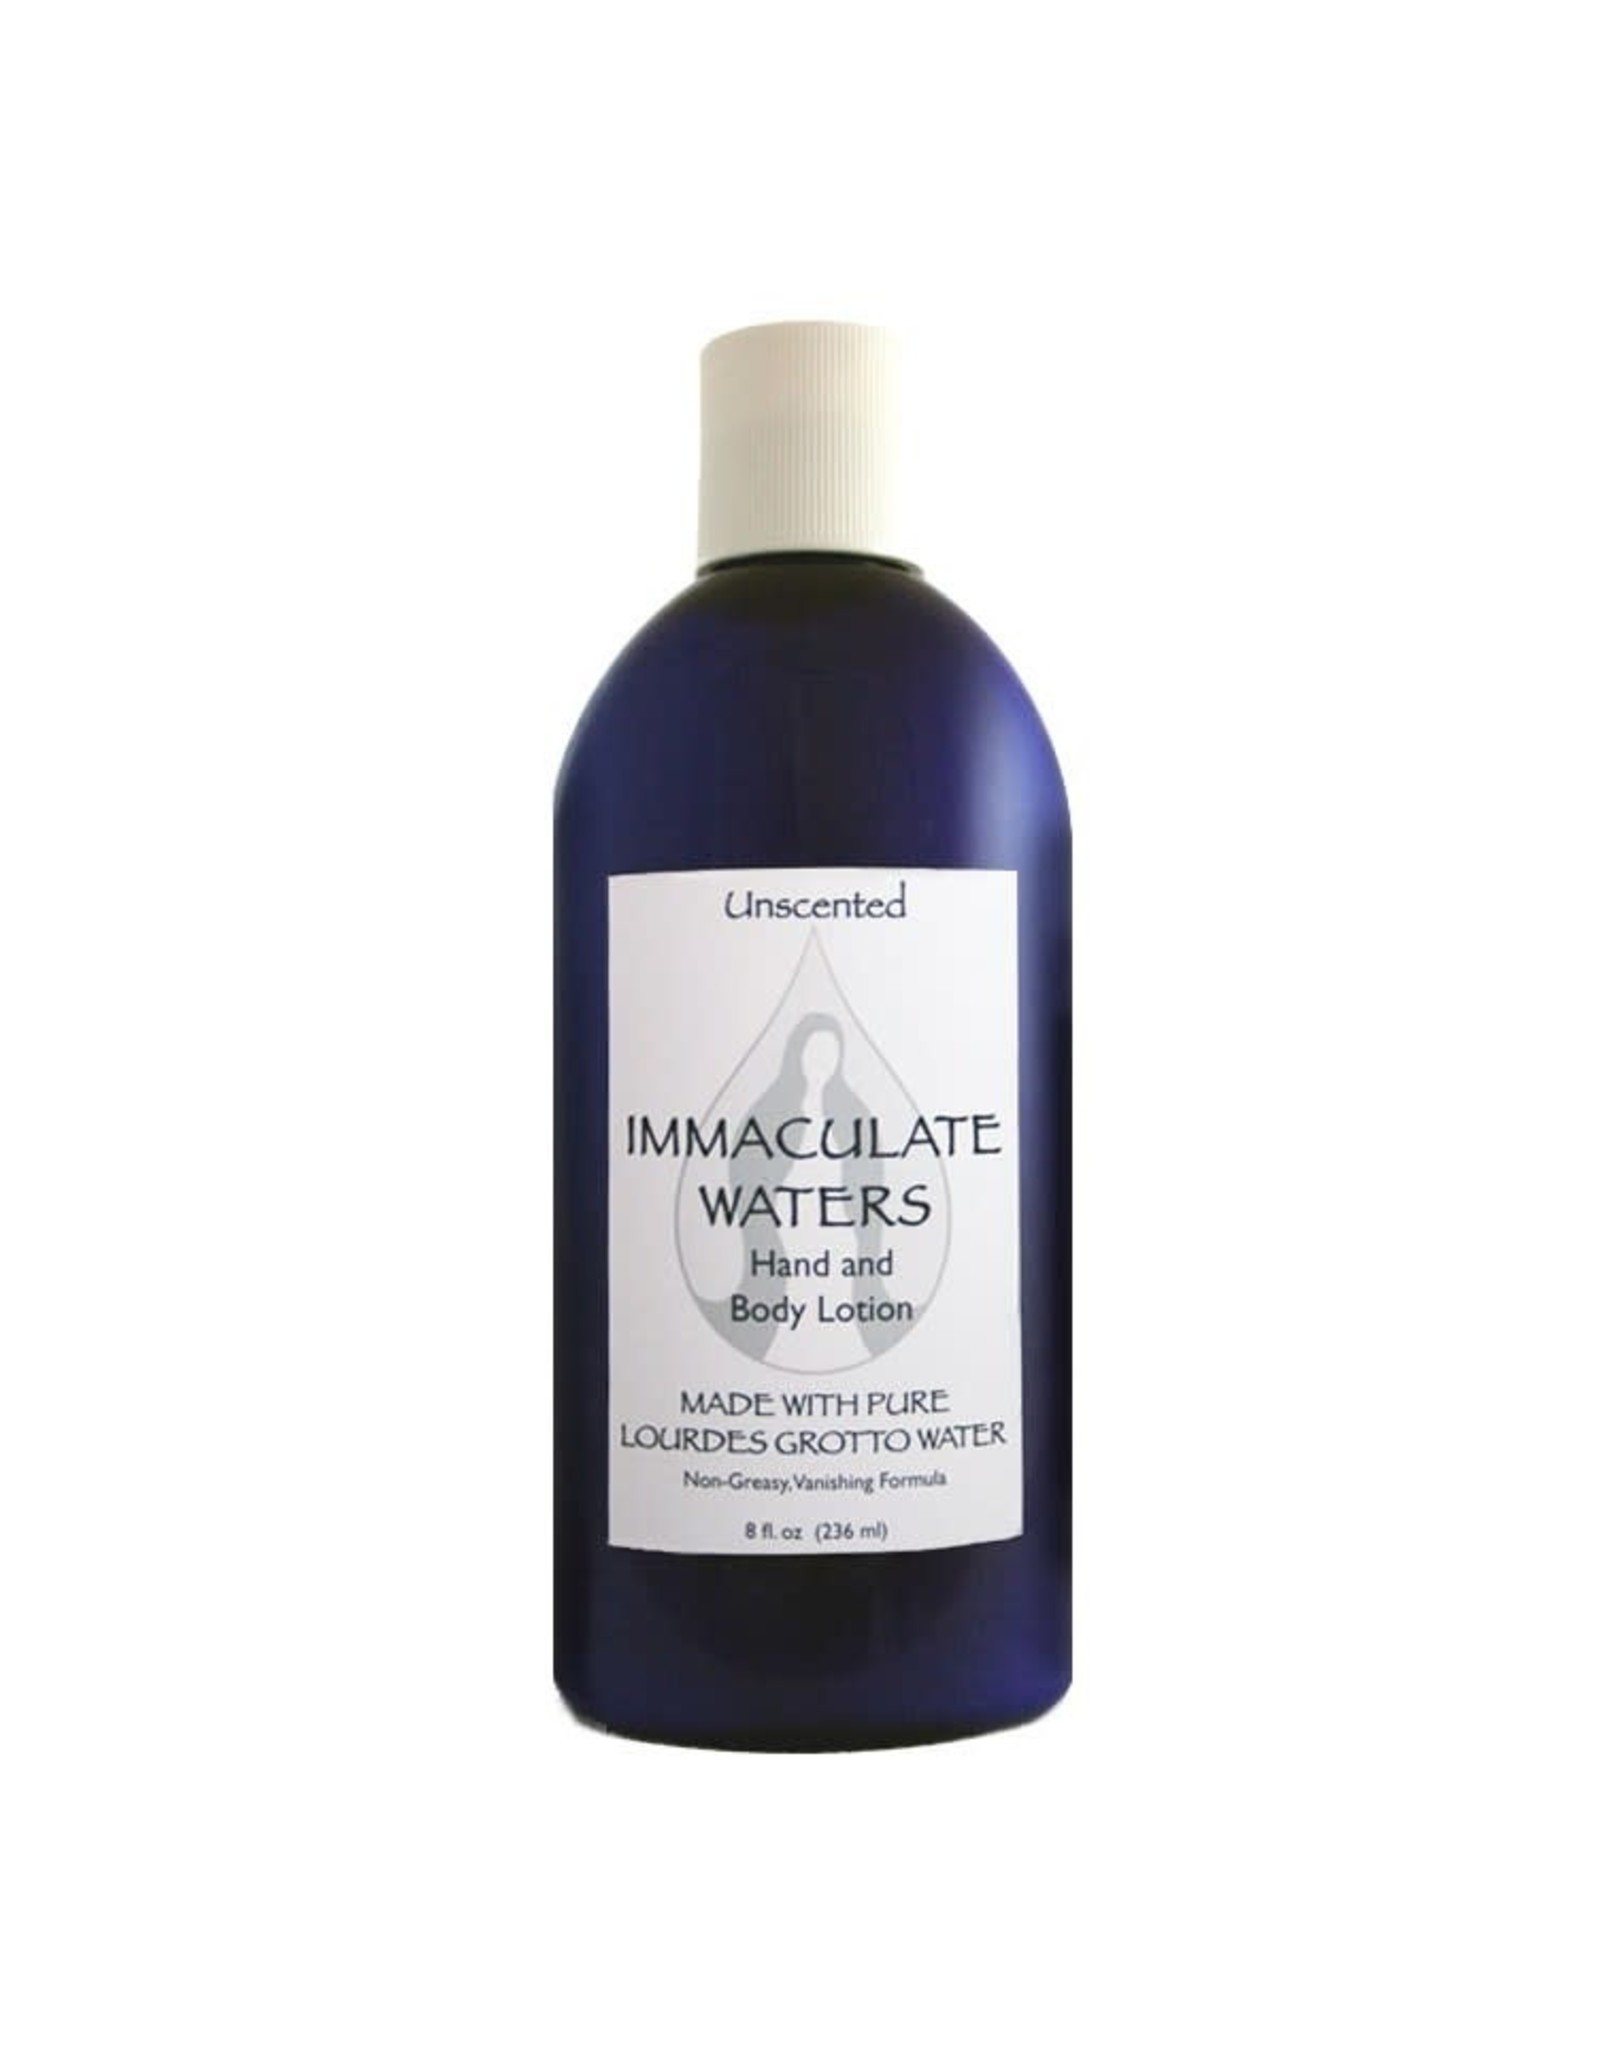 Immaculate Waters Immaculate Waters Hand and Body Lotion - Unscented